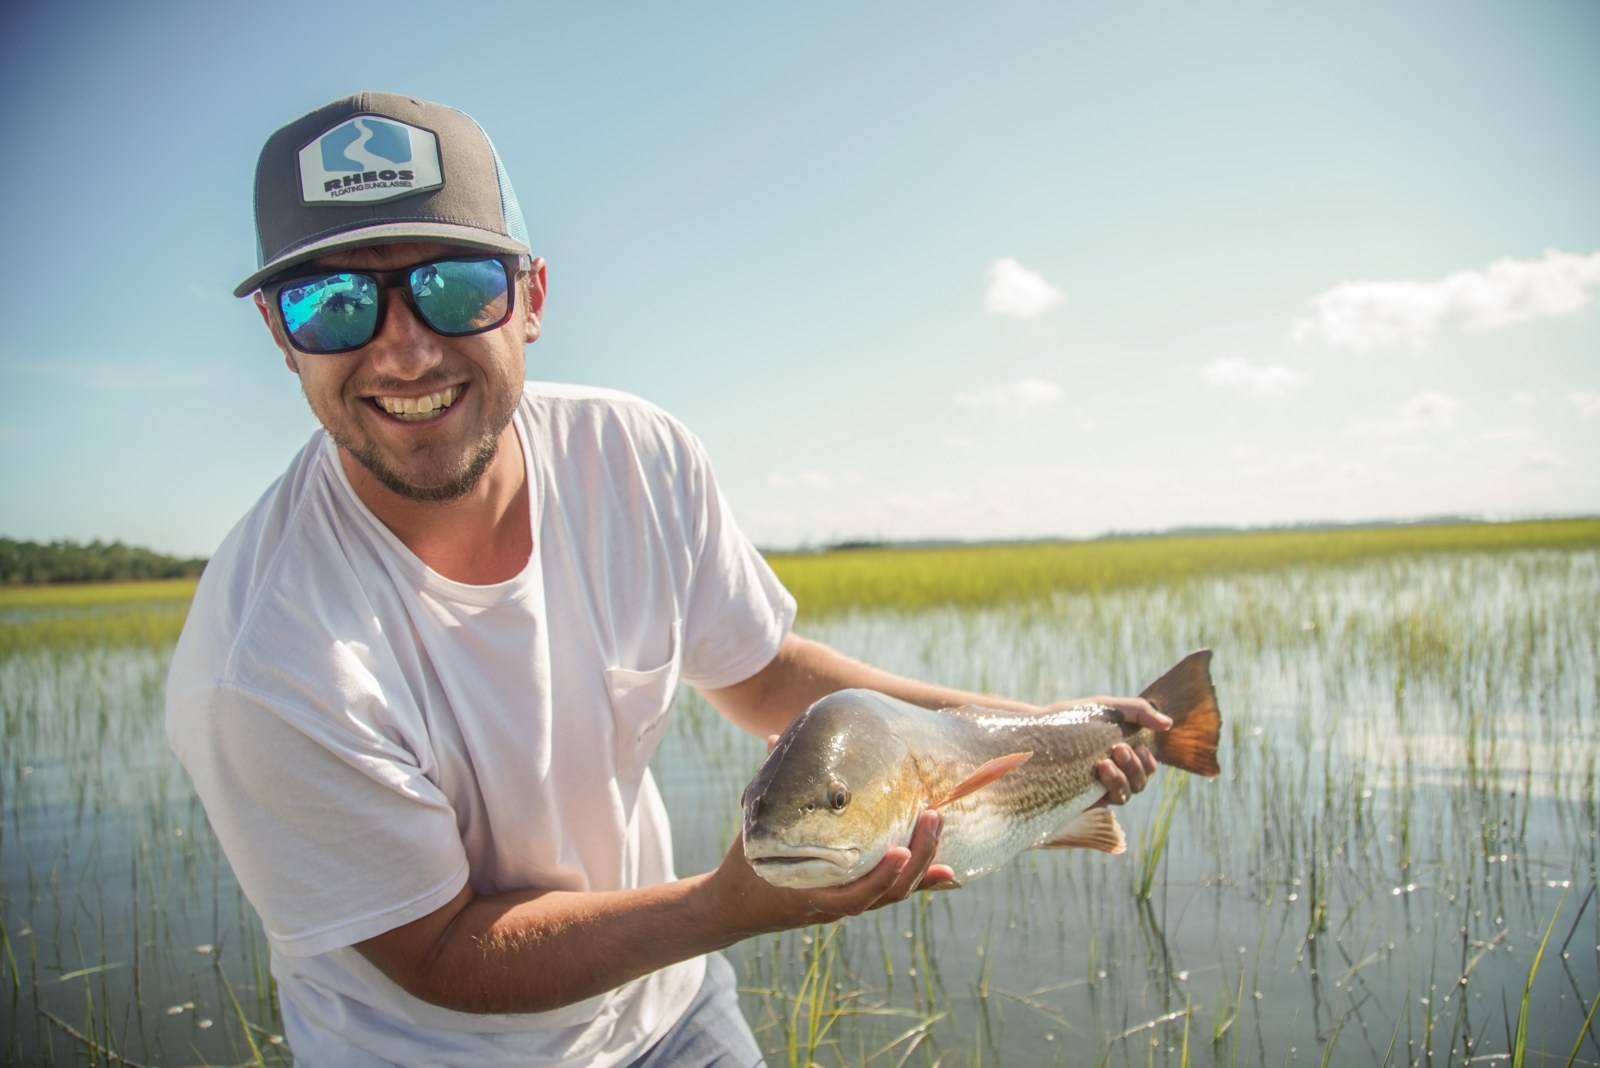 A fisherman holds a fresh-caught red drum fish, seen easier without glare.